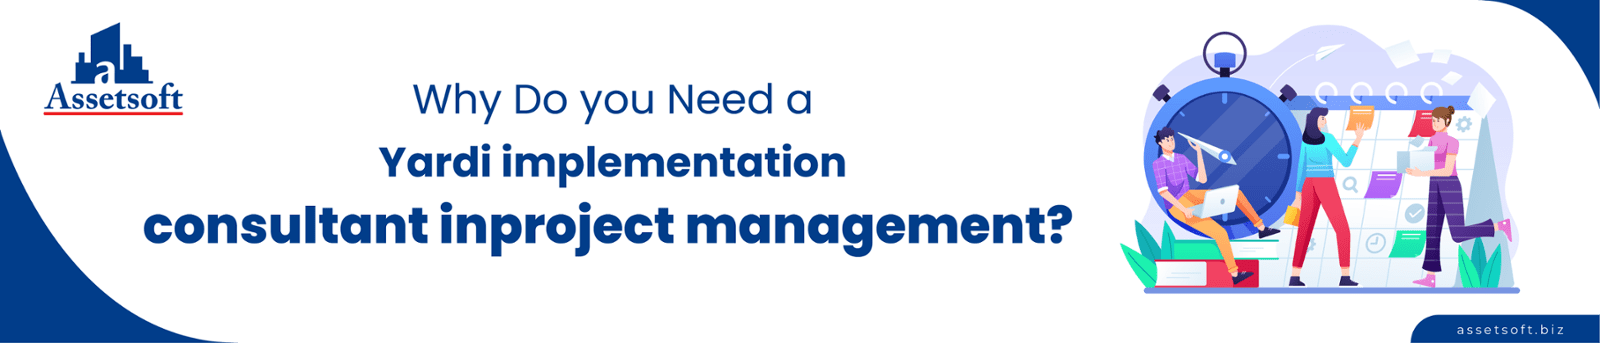 Why Do you Need a Yardi implementation consultant in project management? 